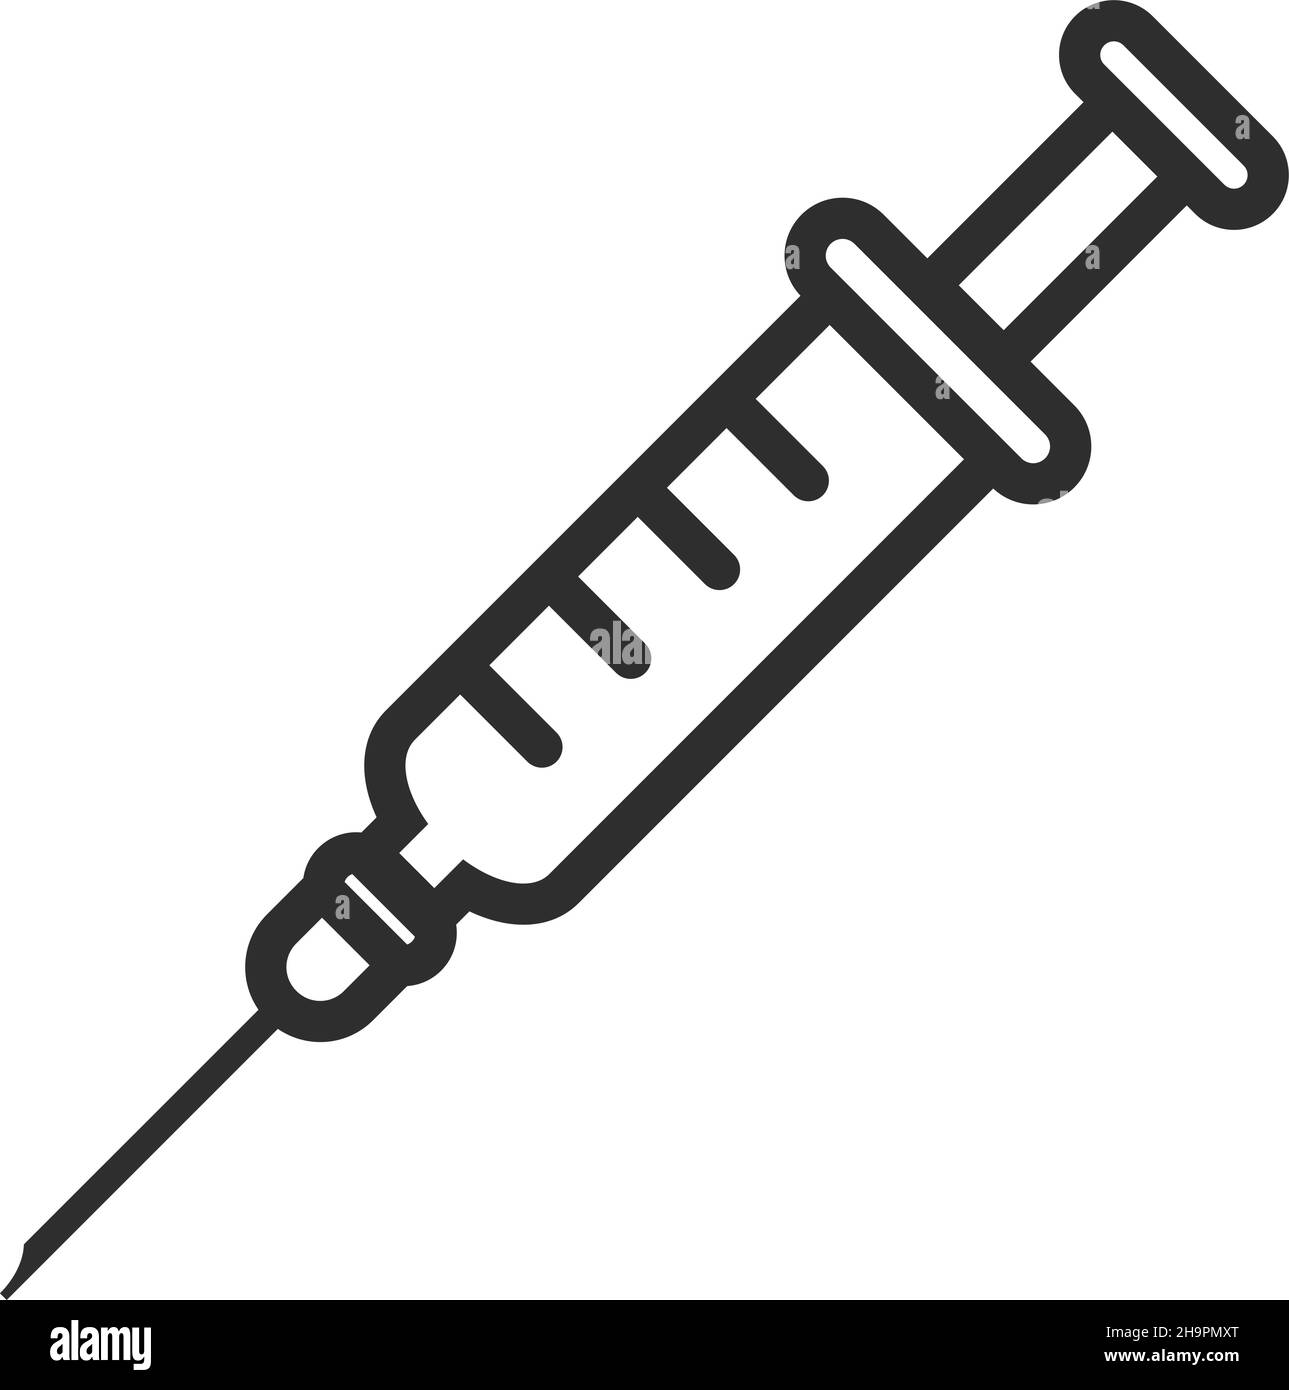 Syringe icon. Medical needle for injection and vaccine Stock Vector